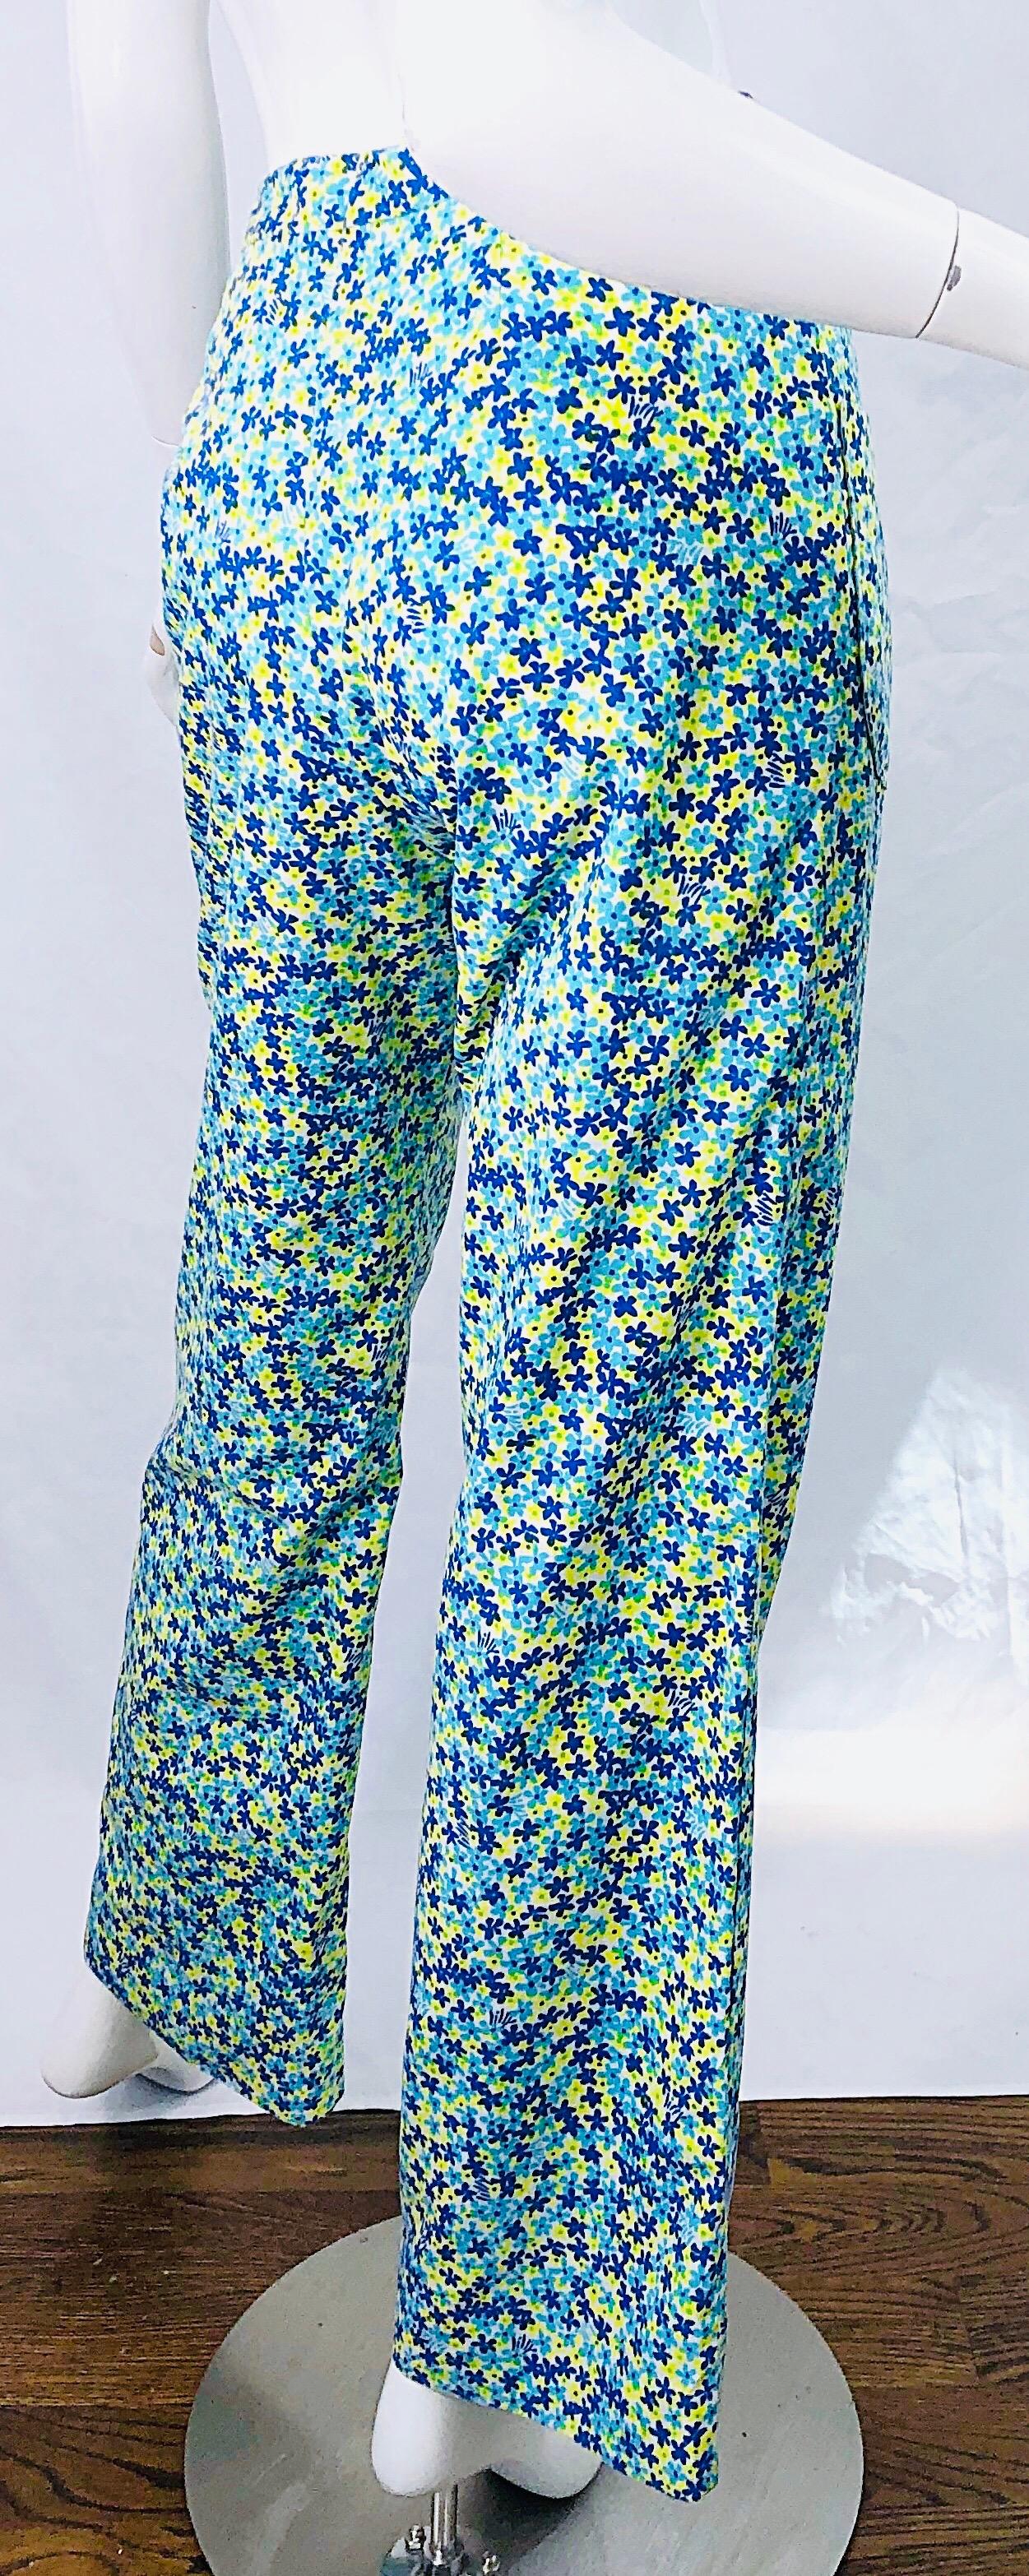 Vintage Lilly Pulitzer 1970s High Waisted Blue + Yellow + Turquoise Bell Bottoms 2